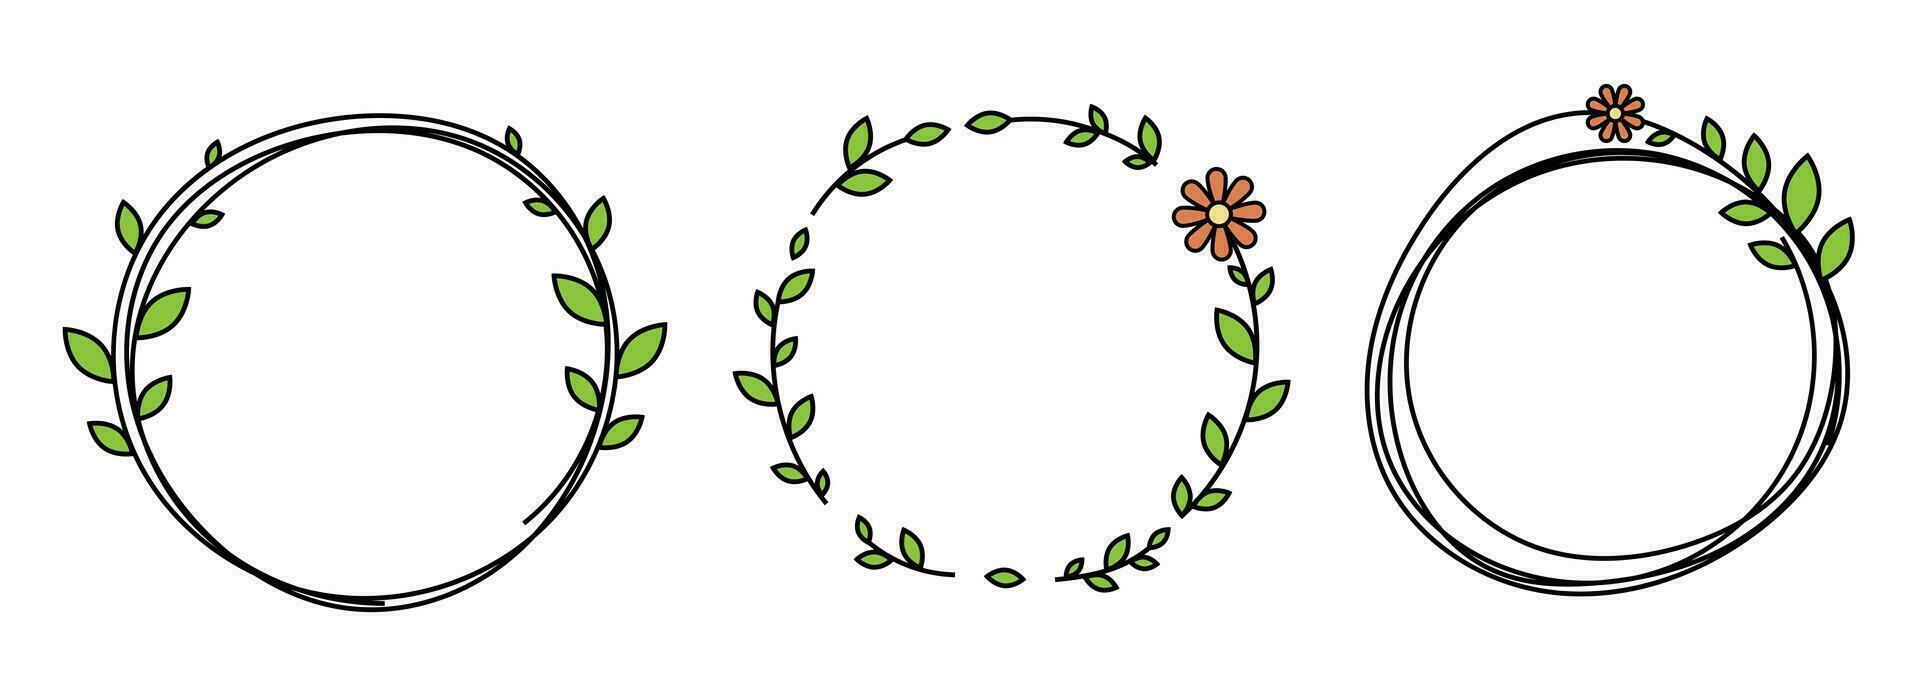 Hand drawn circle frame decoration element with leaves and flowers clip art vector